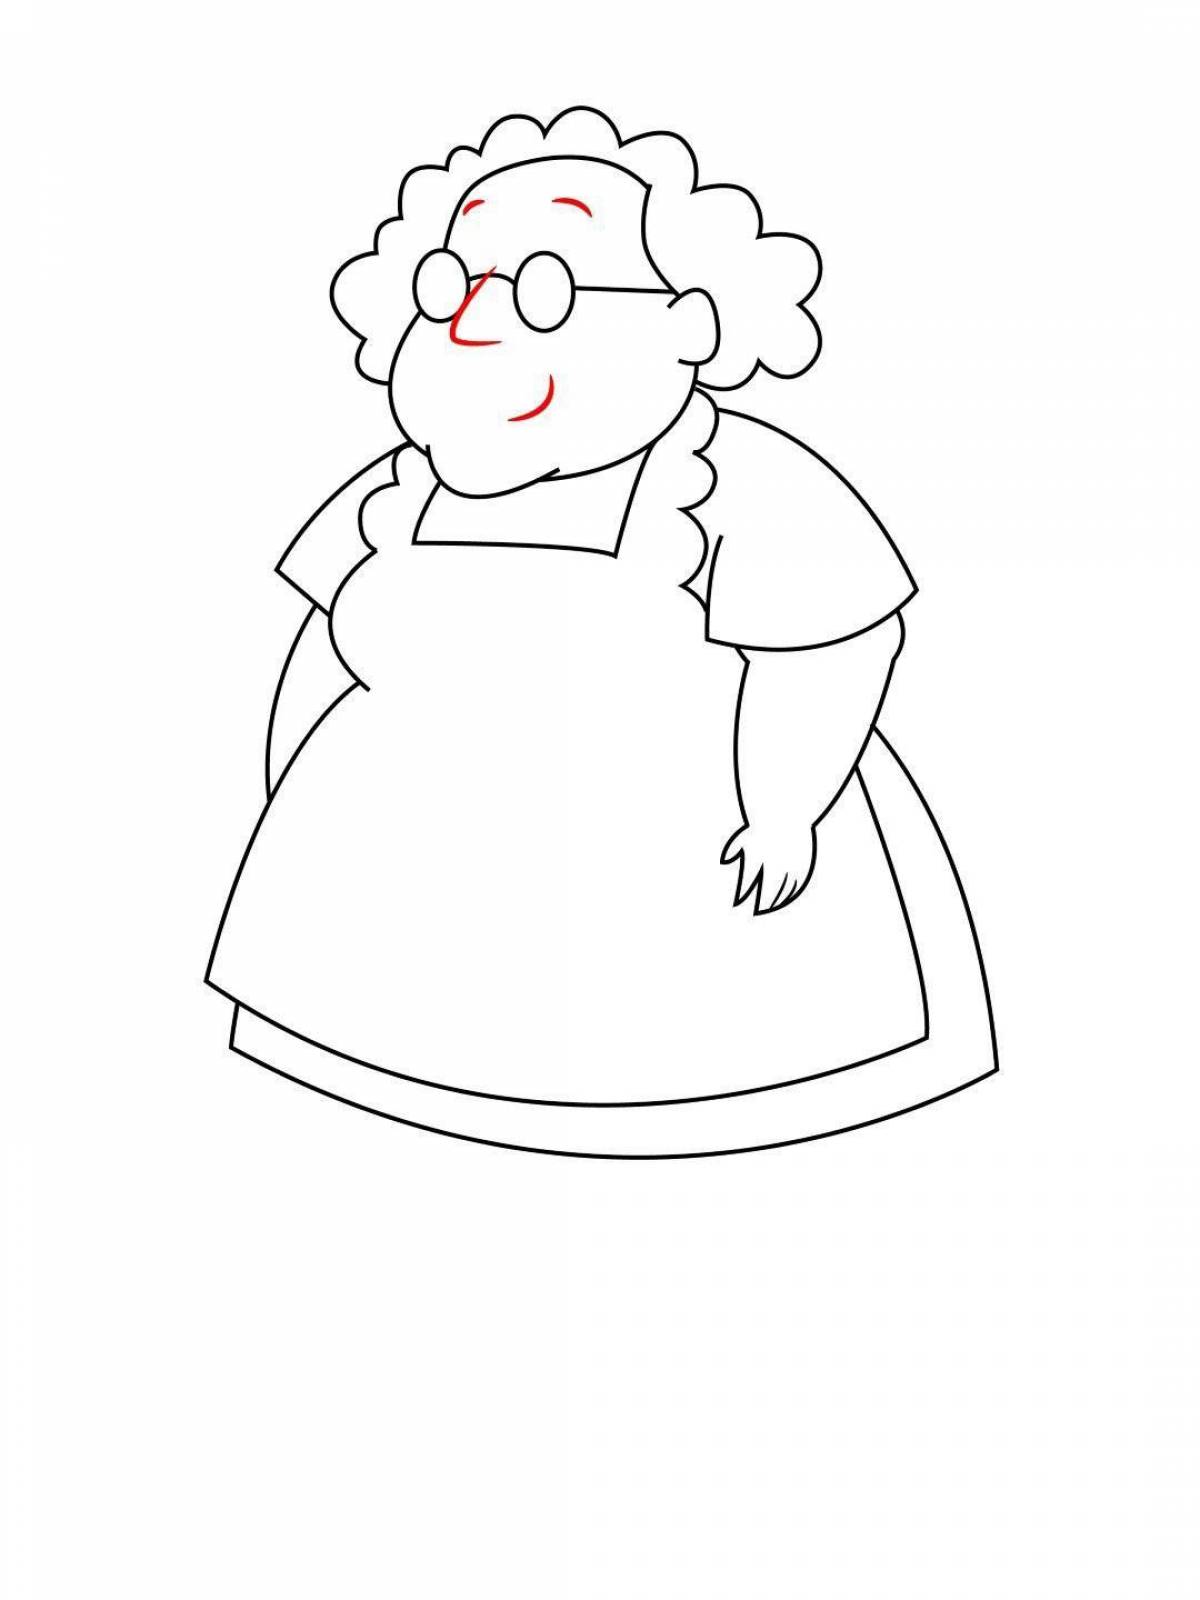 Great grandmother coloring page